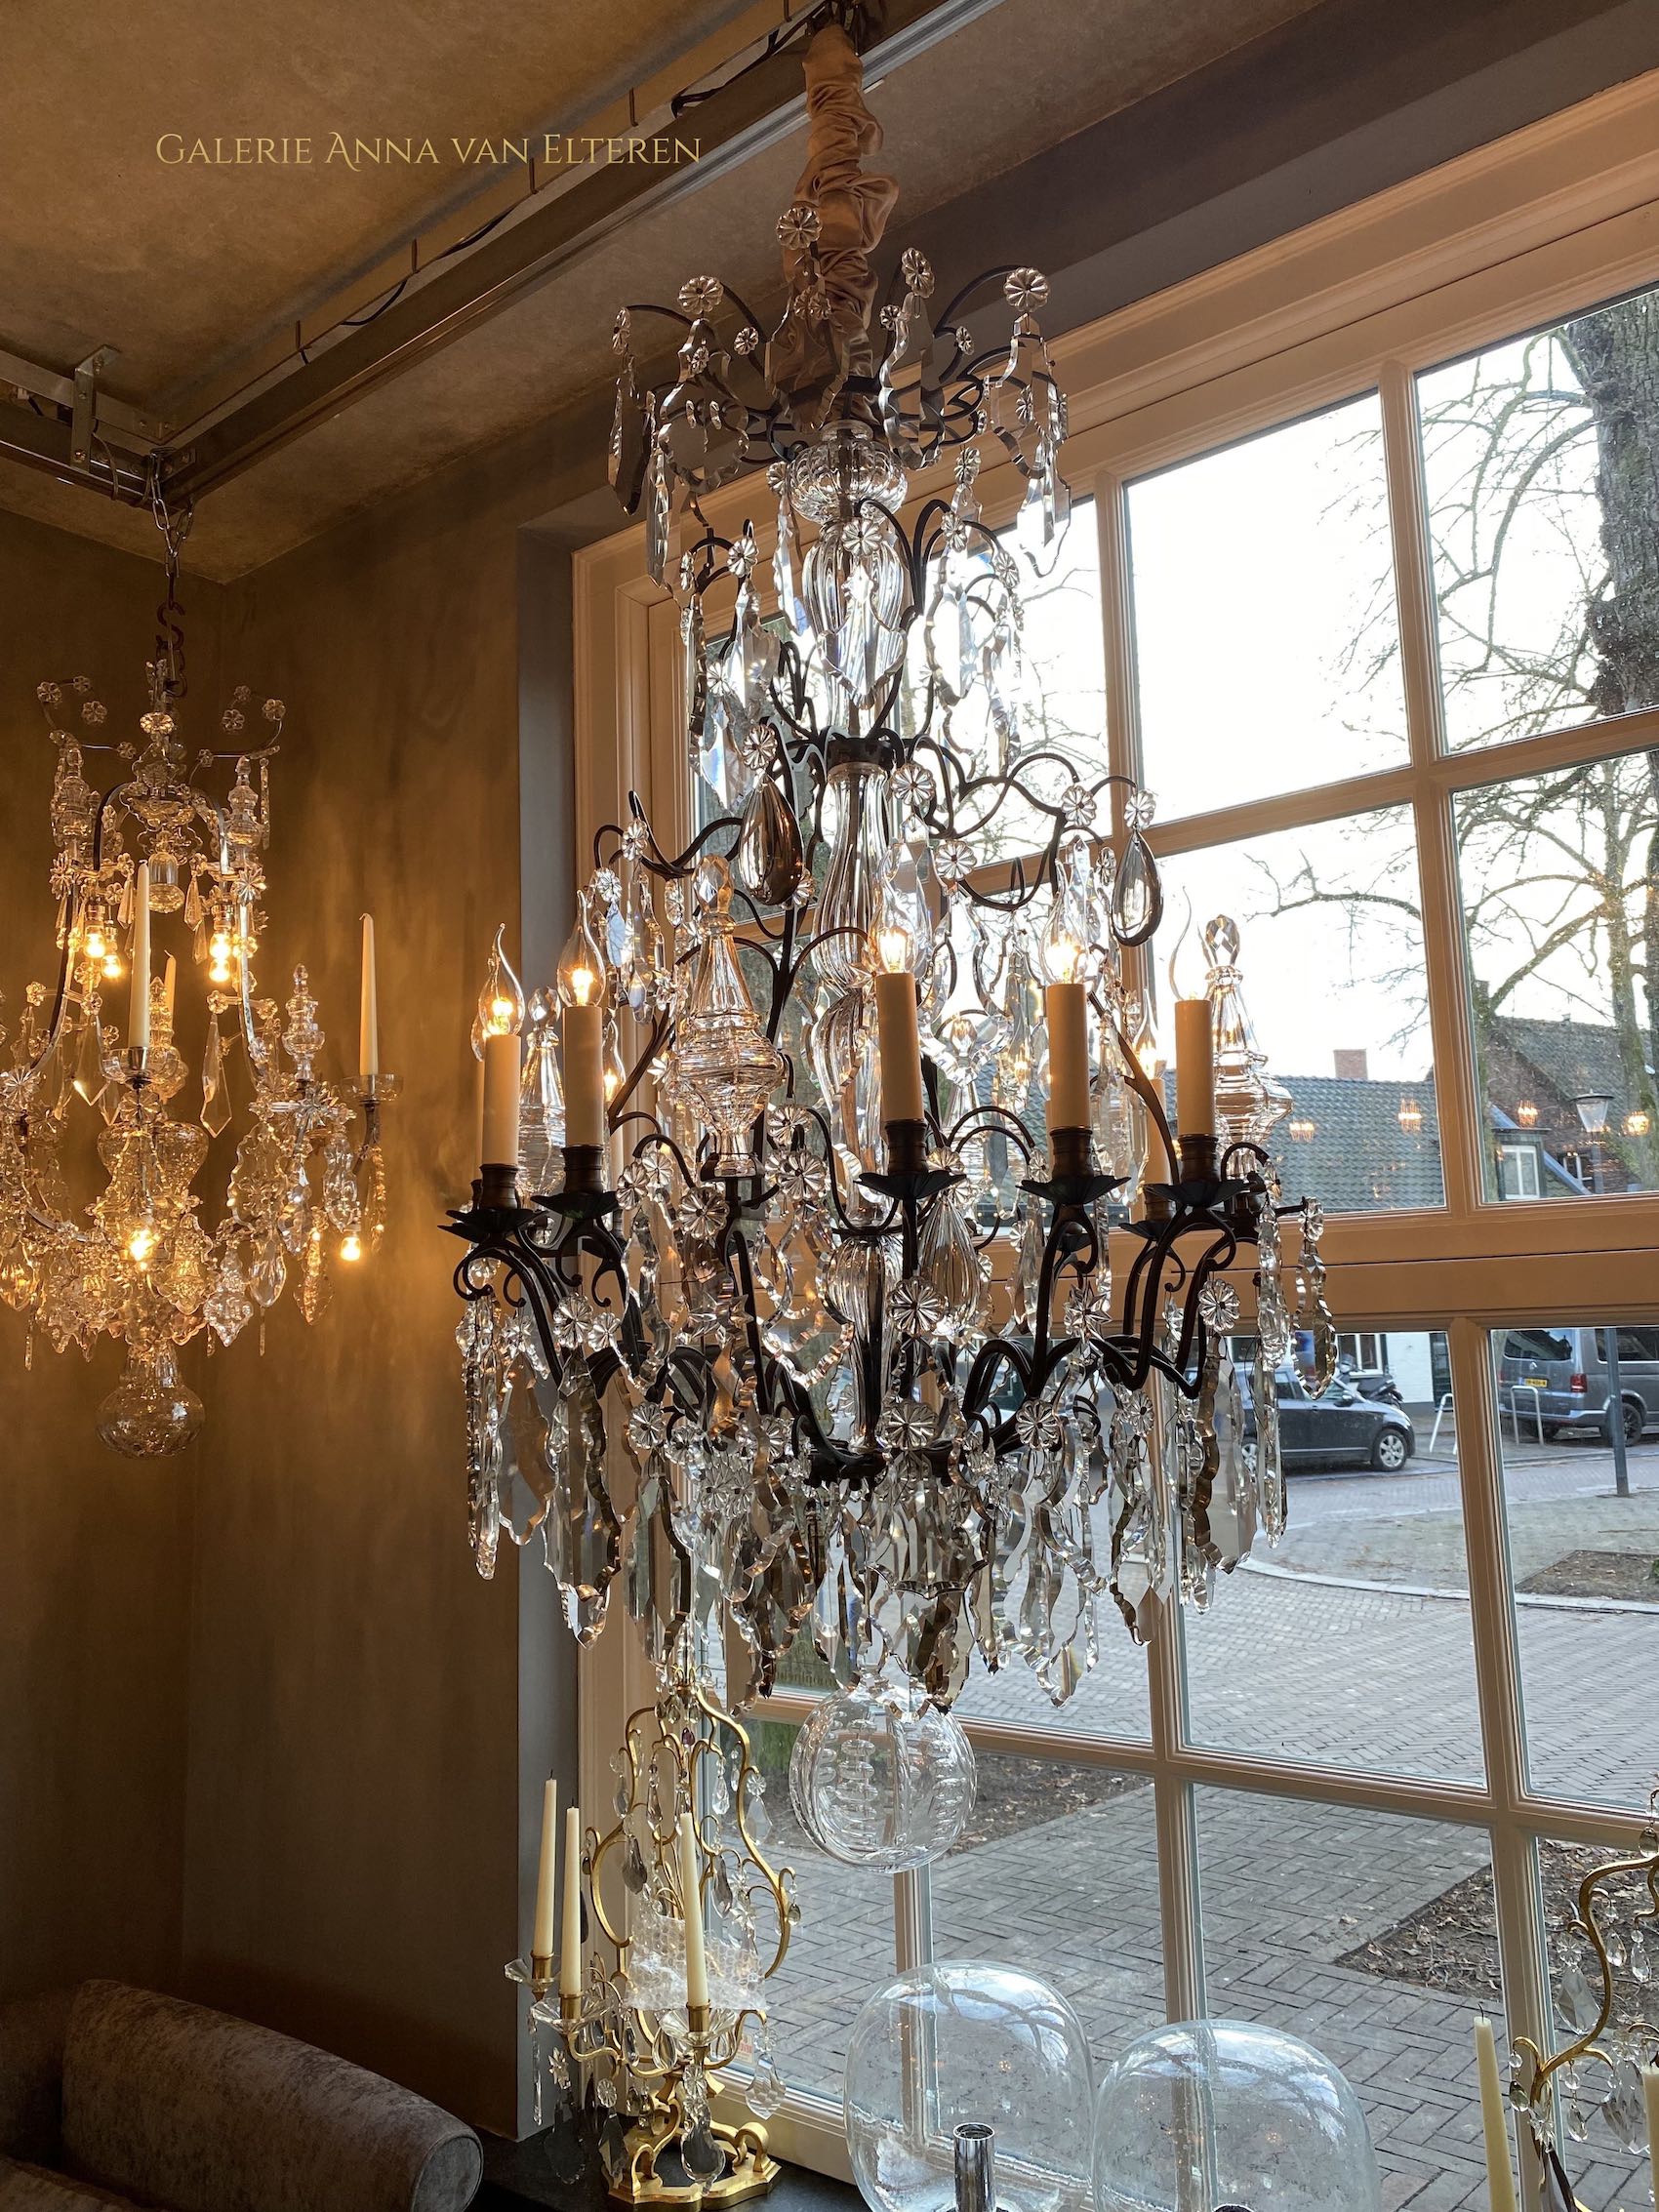 Large antique French chandelier in the style of Louis XV